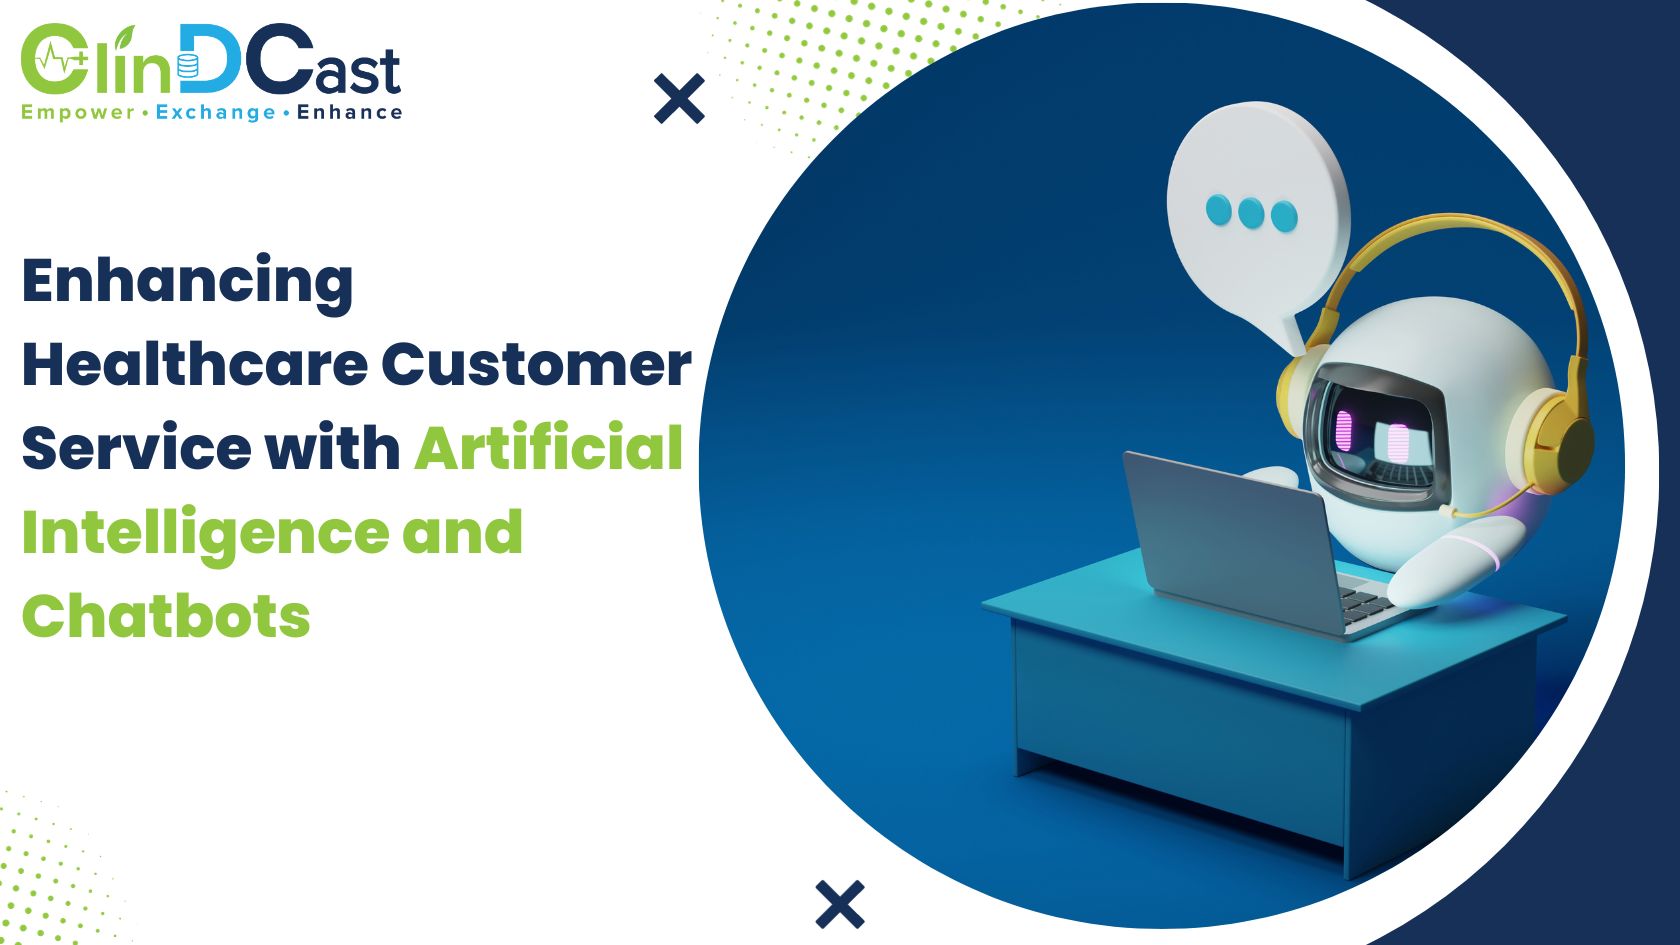 Enhancing Healthcare Customer Service with Artificial Intelligence and Chatbots